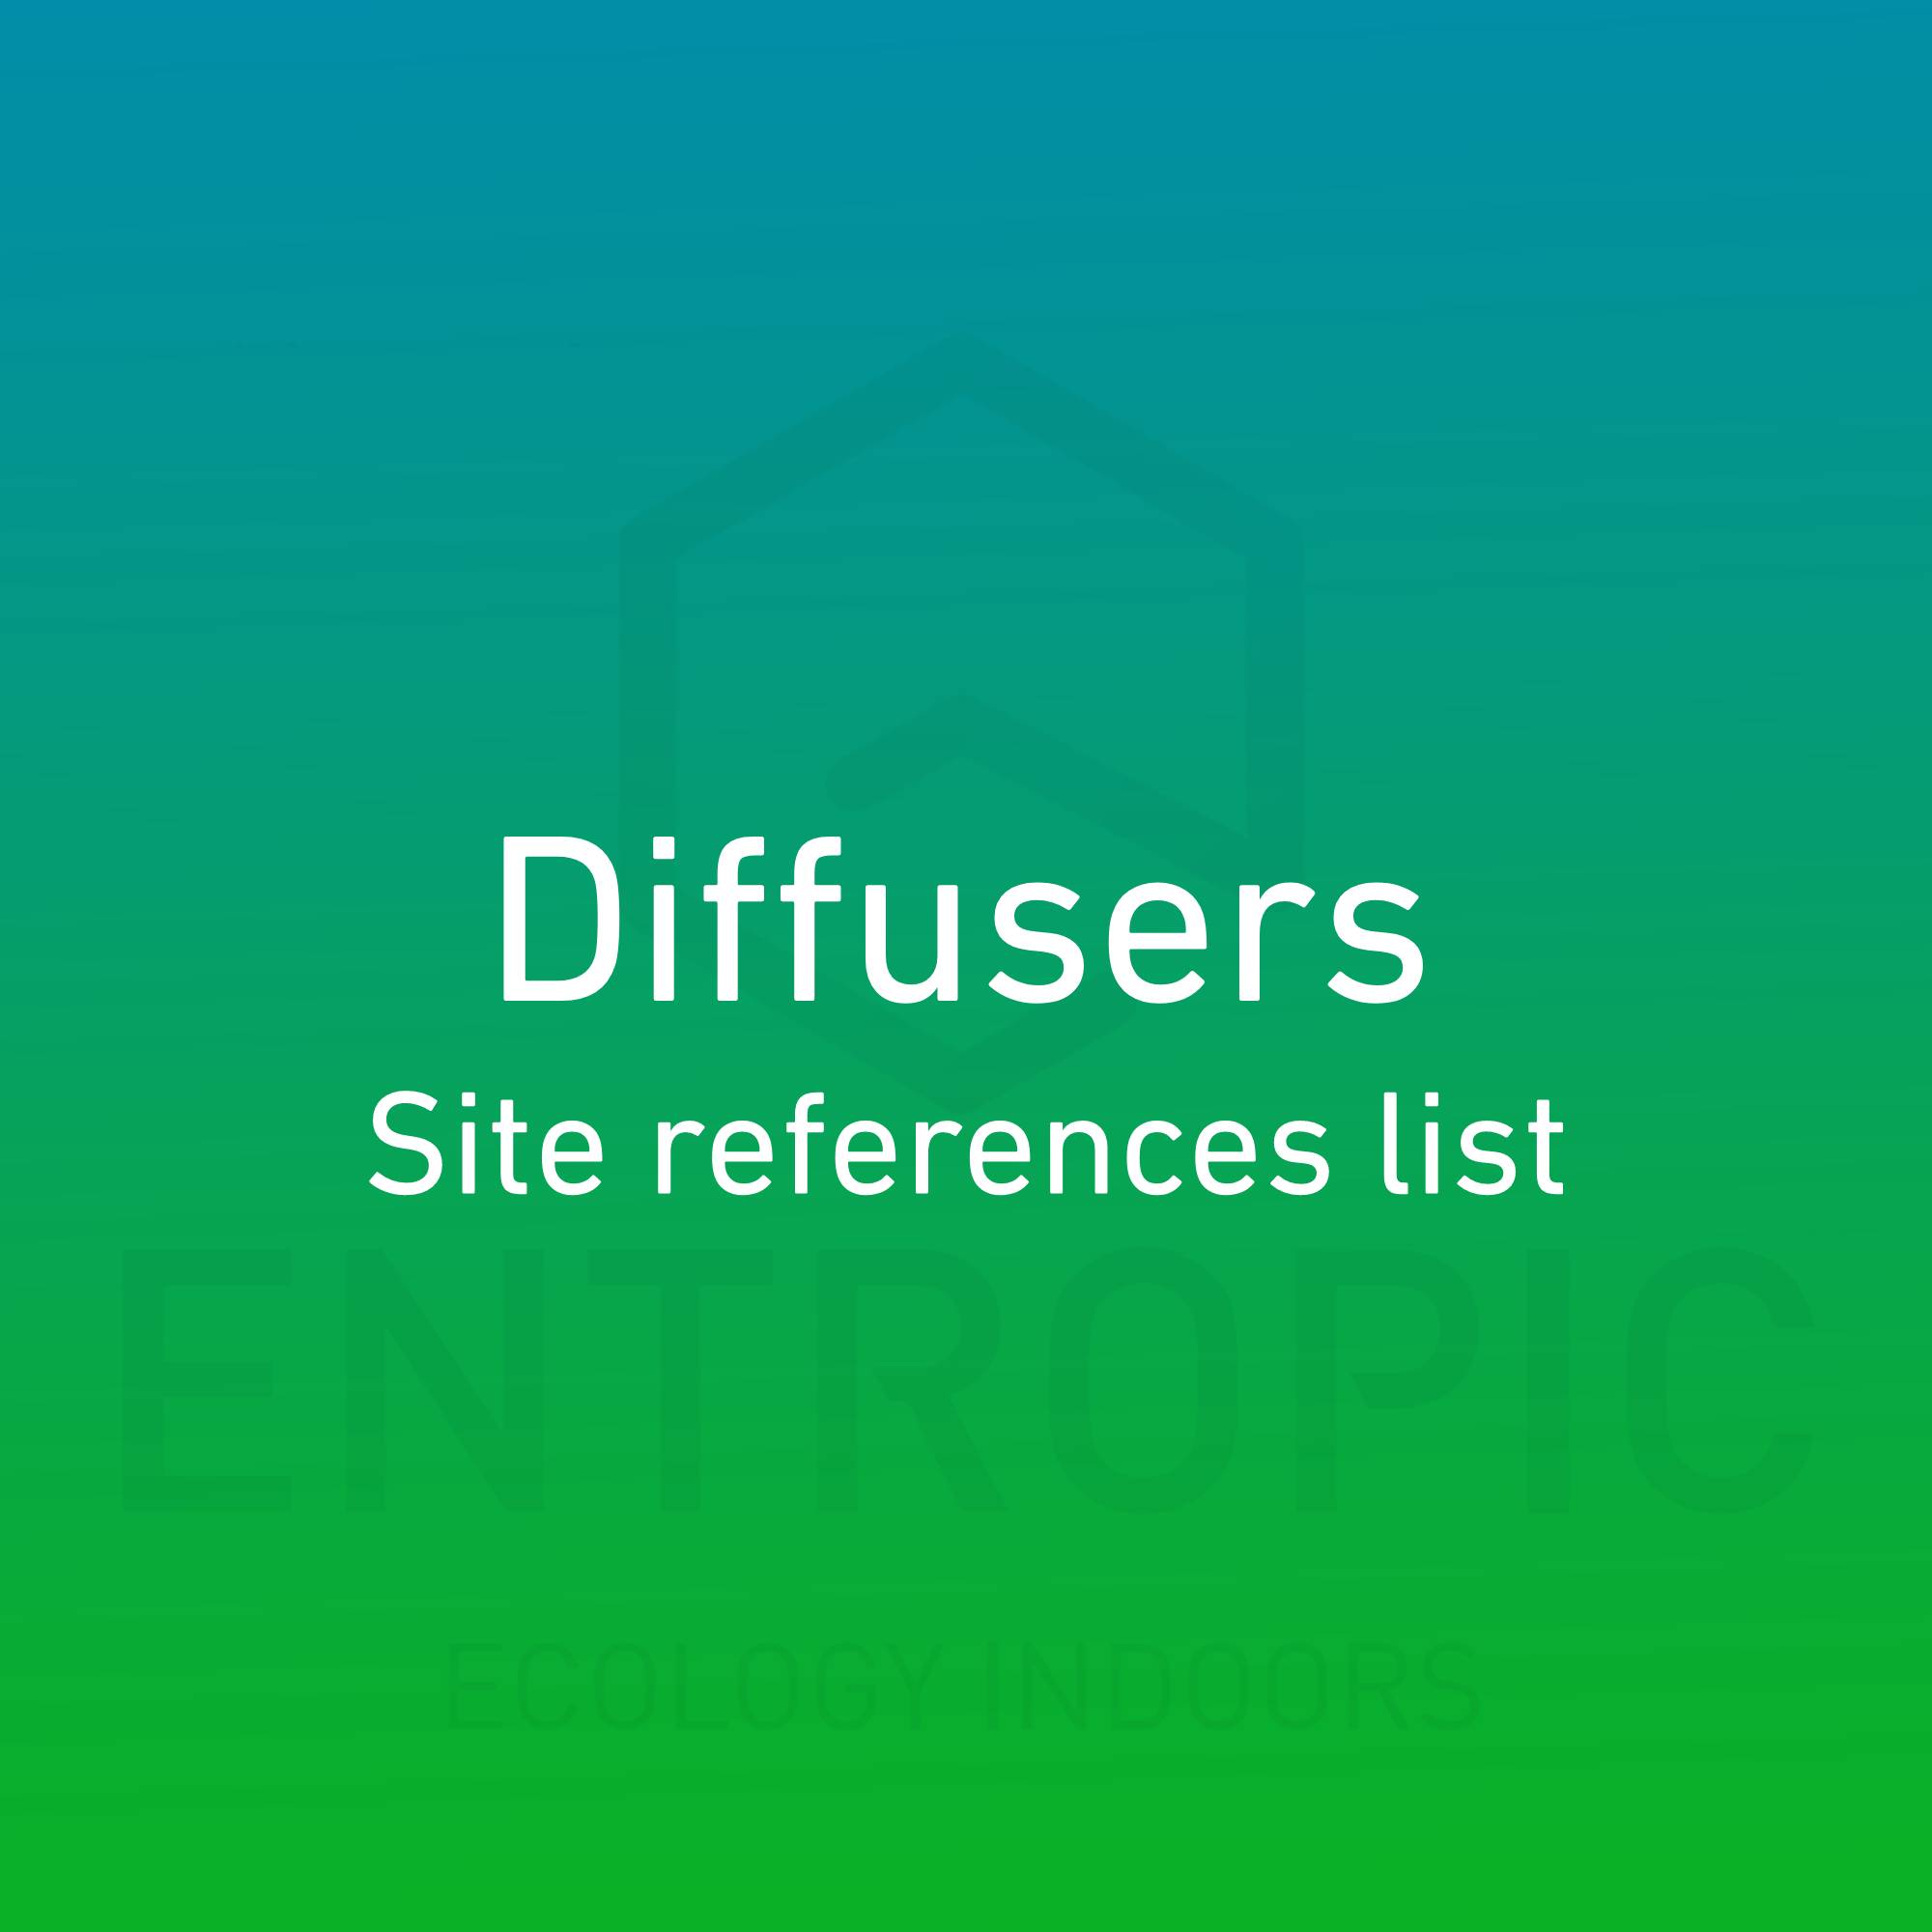 diffusers-site-reference-list